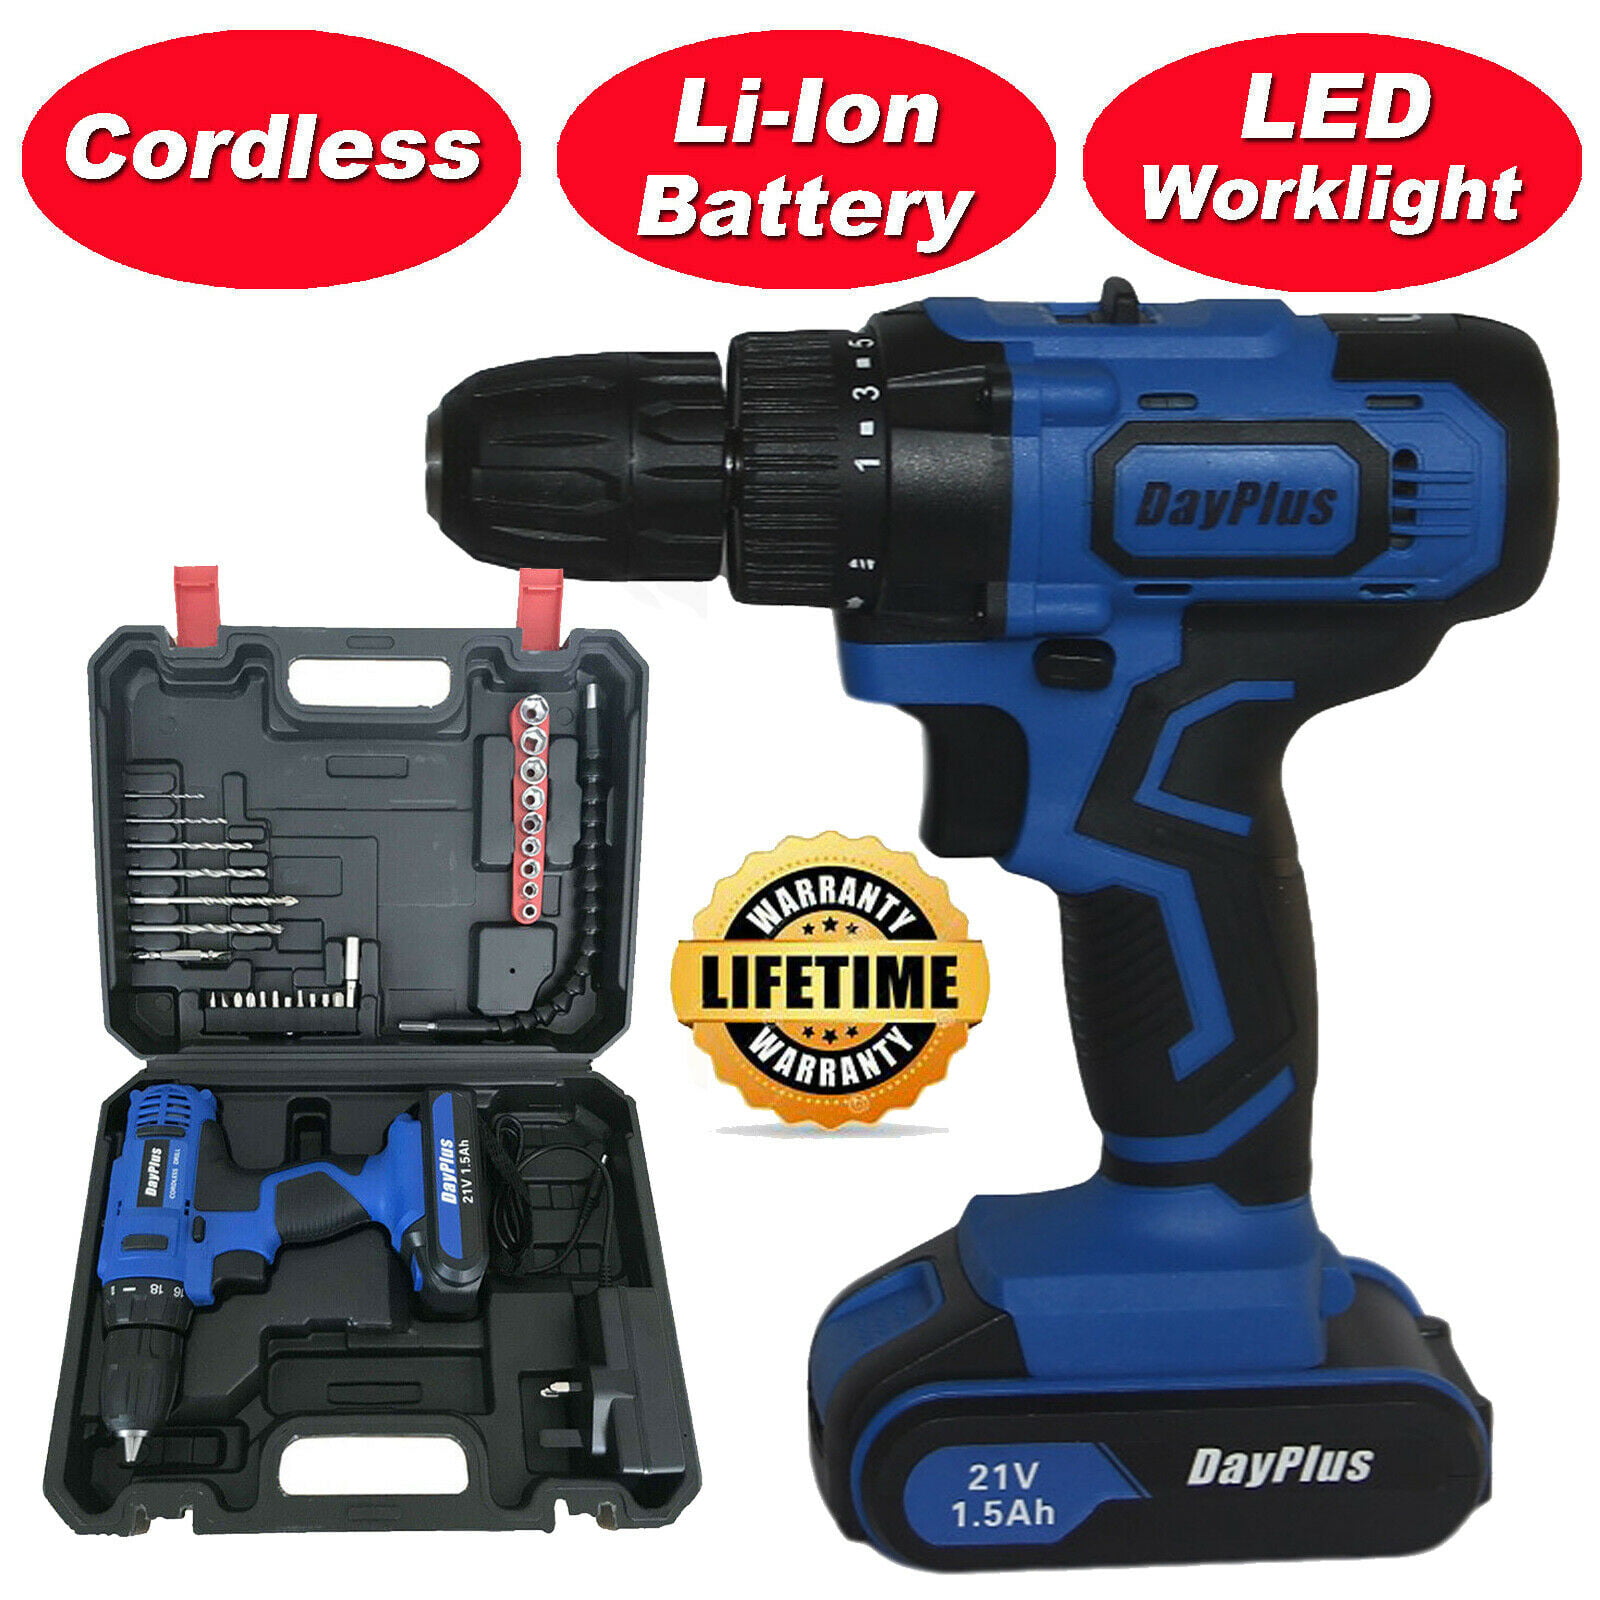 45N.m Cordless Drill Driver 21V-Max Li-Ion Combi Drill in Carry Case 2 x Quick Change Batteries & 1x Charger Included Electric Screwdriver LED Work Light Accessory Kit 